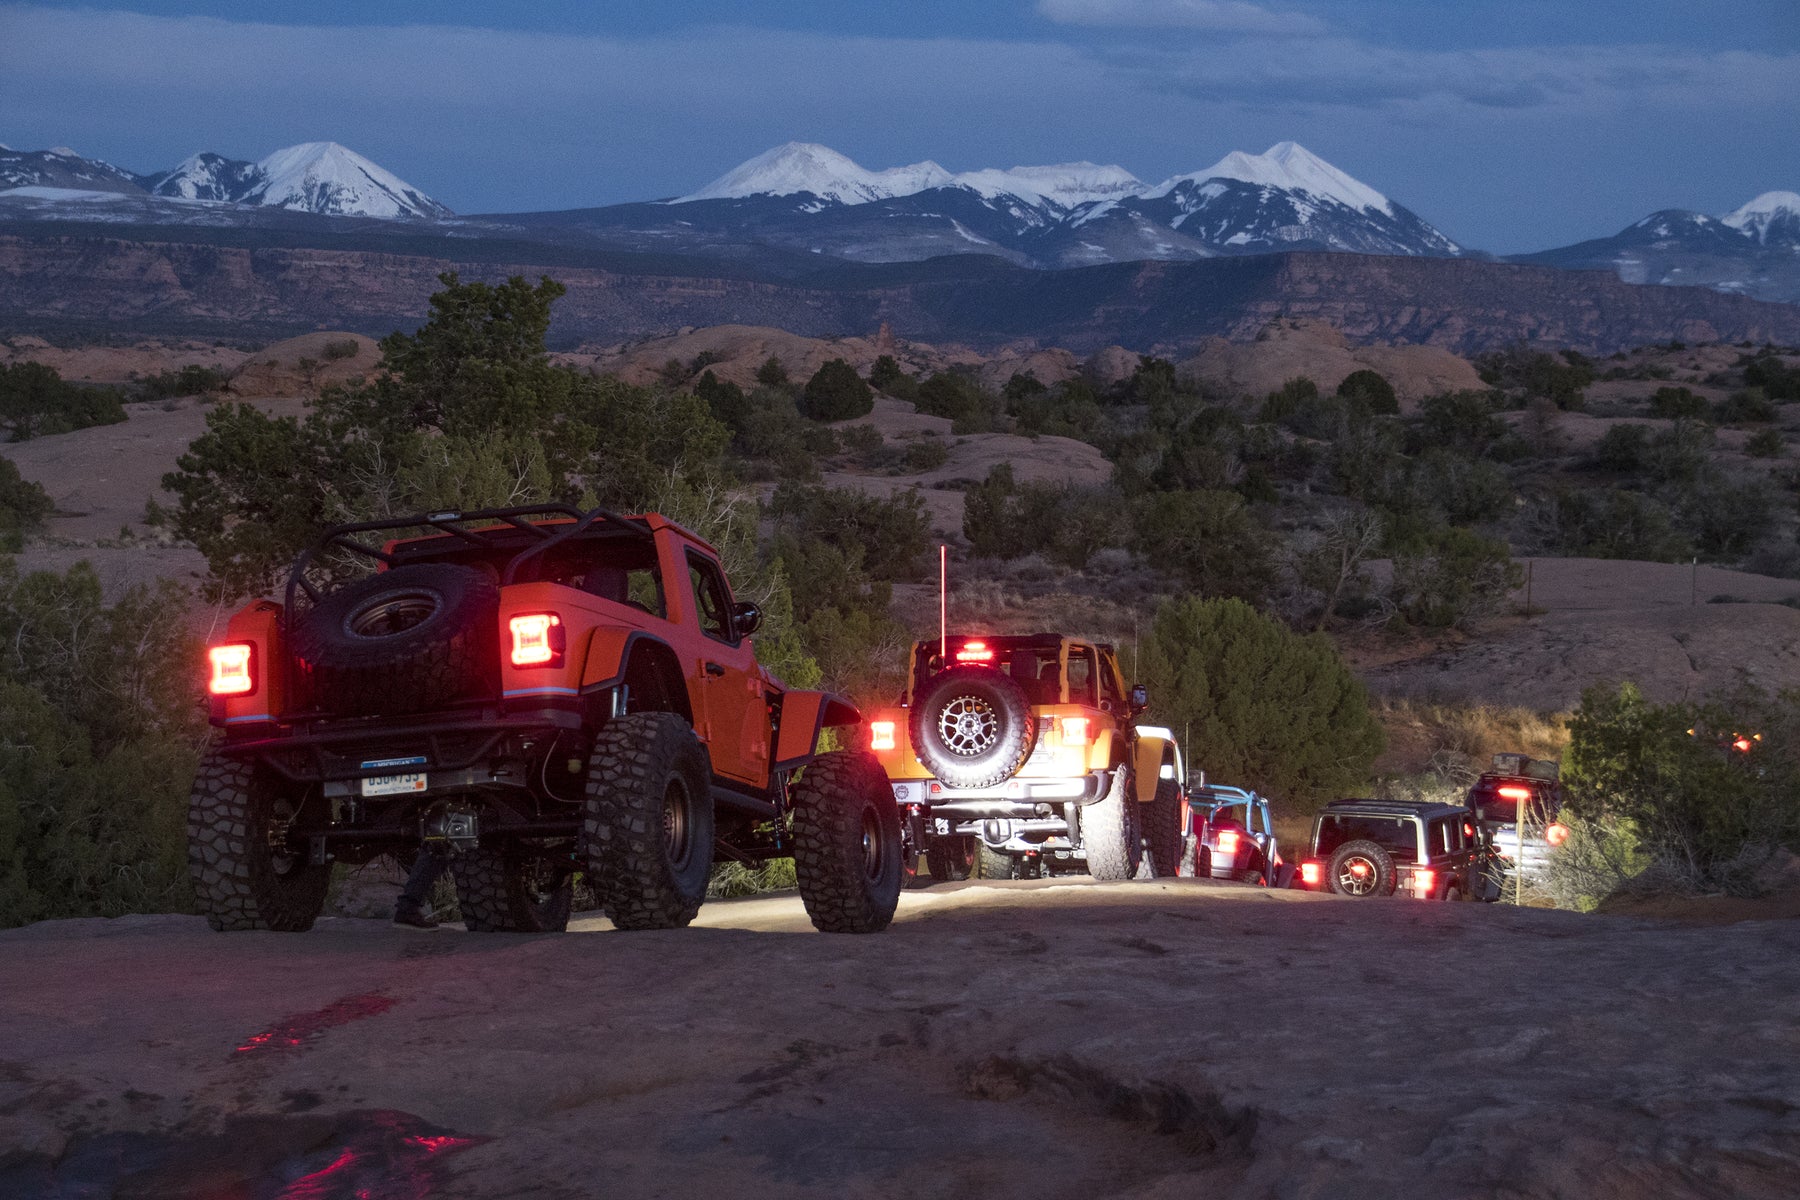 Aux Lights – Why Placement and Color Can Matter When It Comes to Off-Roading